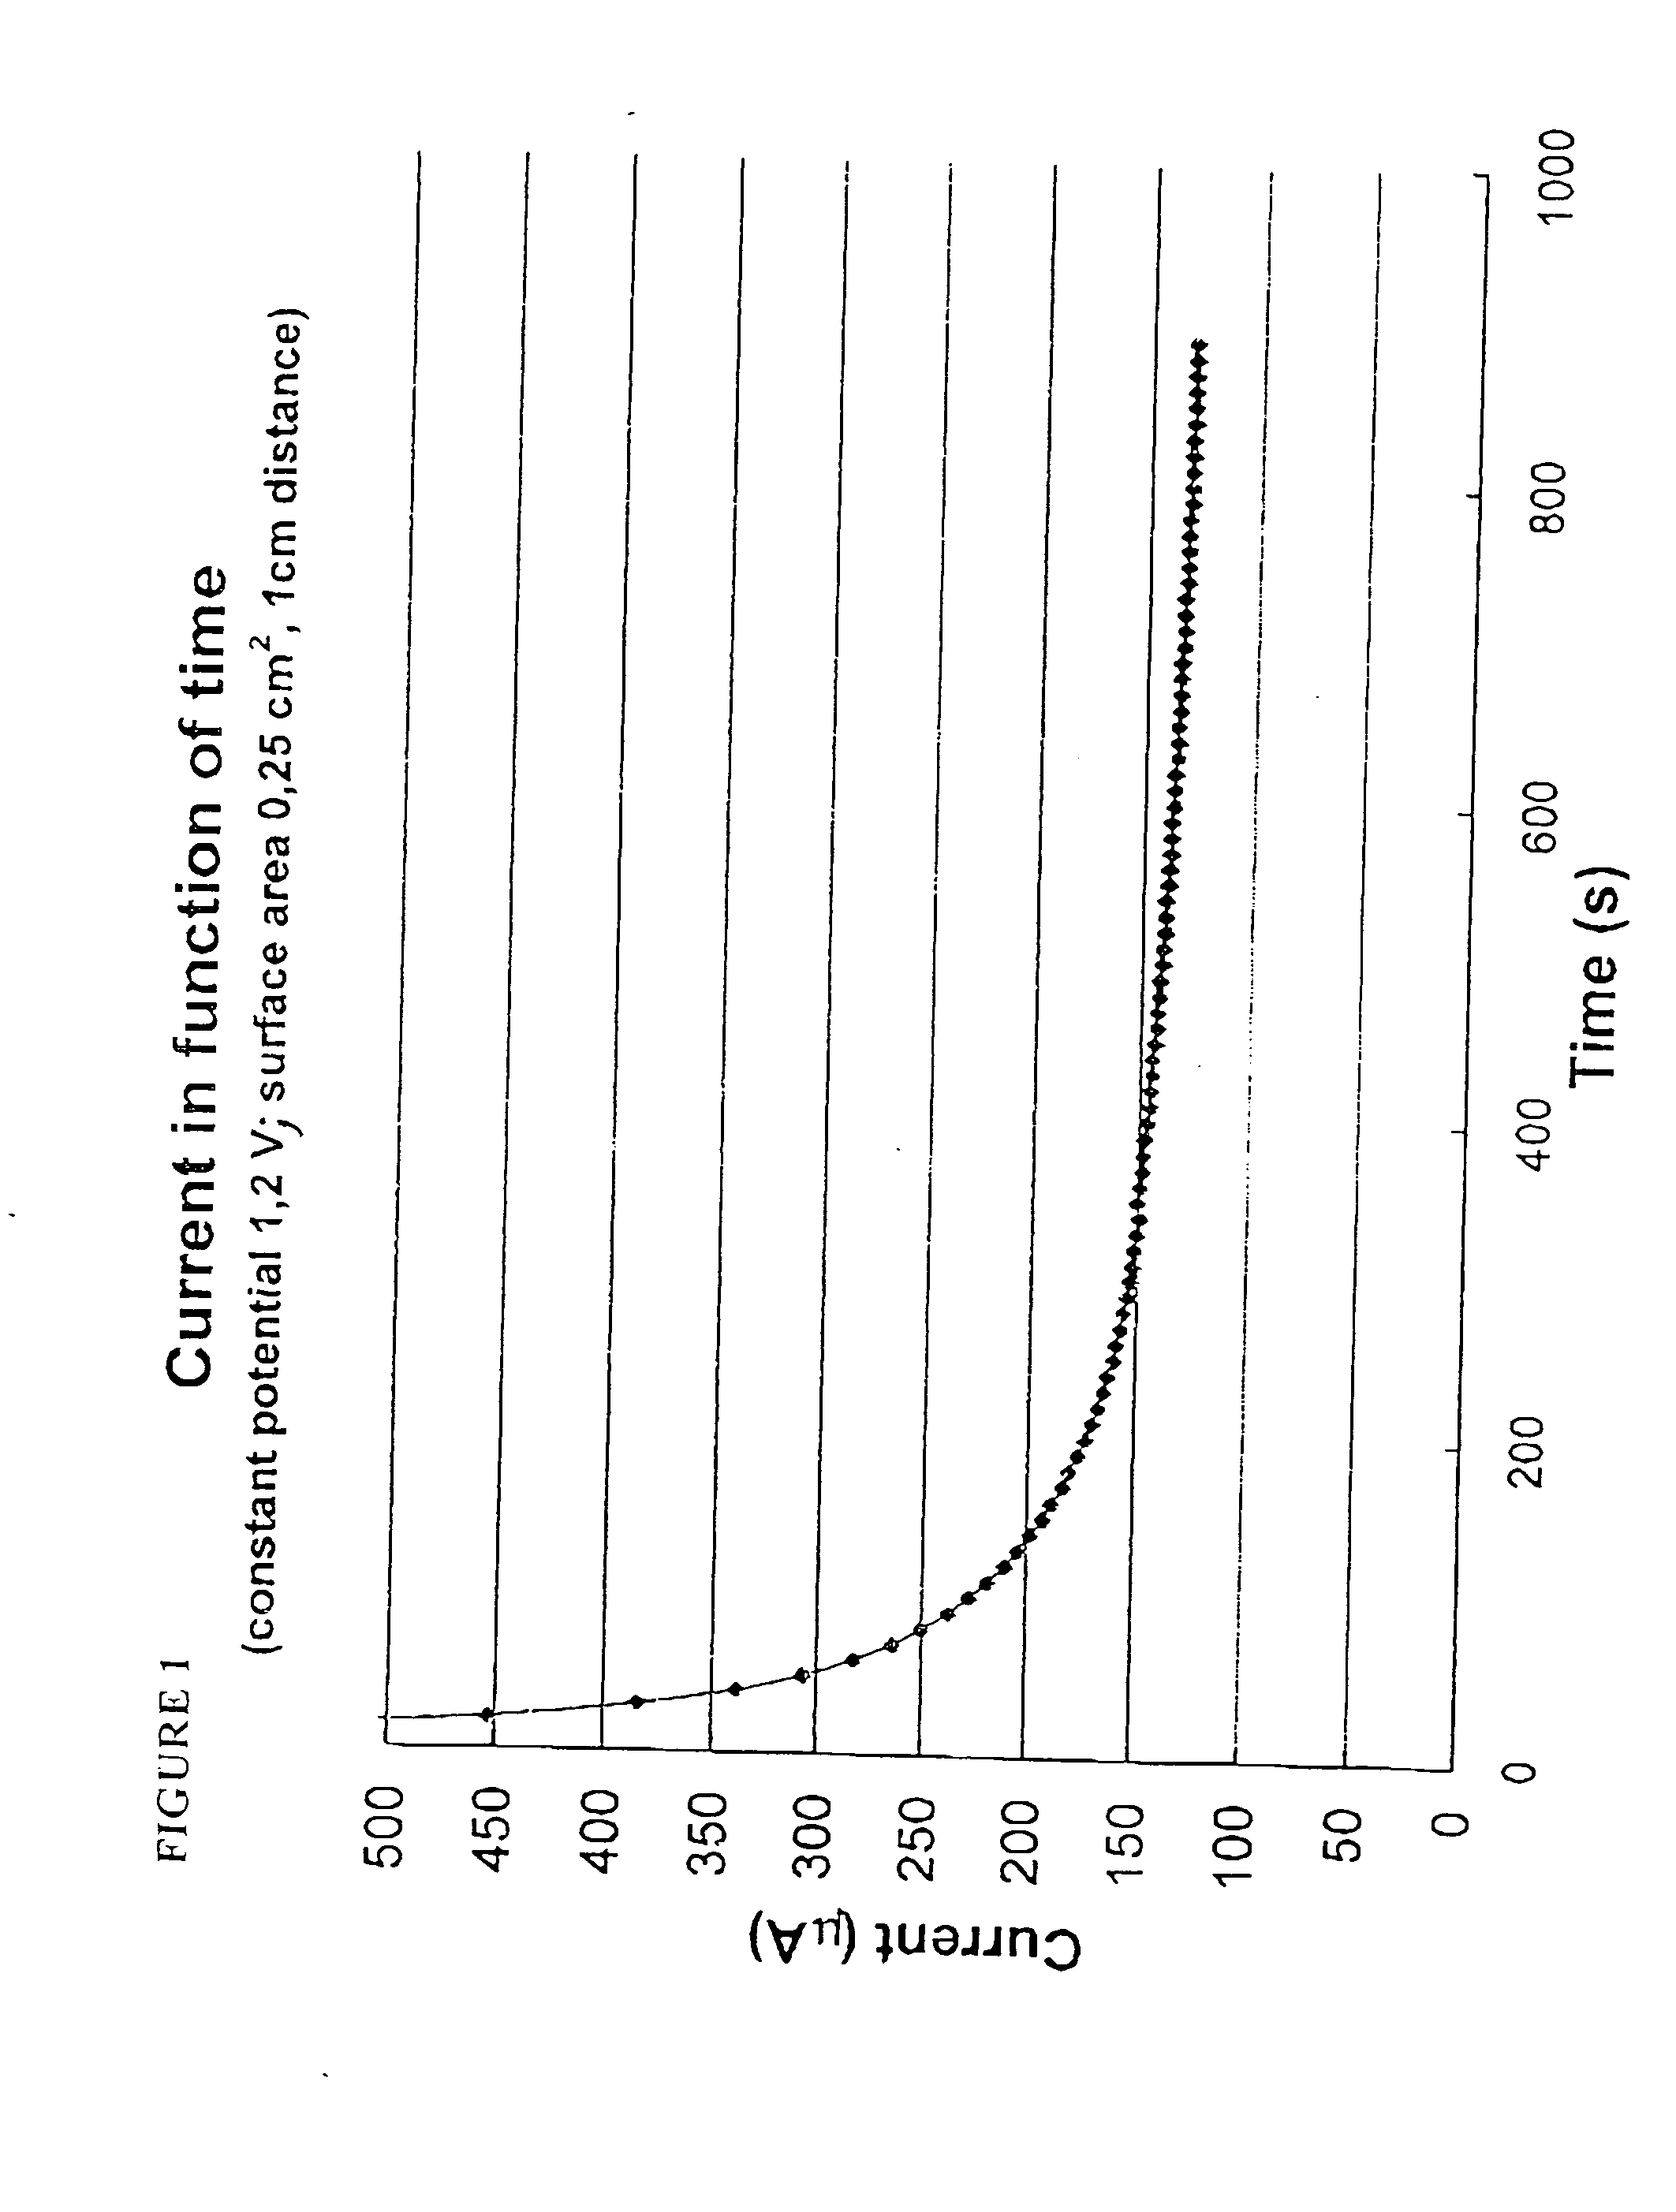 Corrosion inhibiting compositions and methods for fuel cell coolant systems